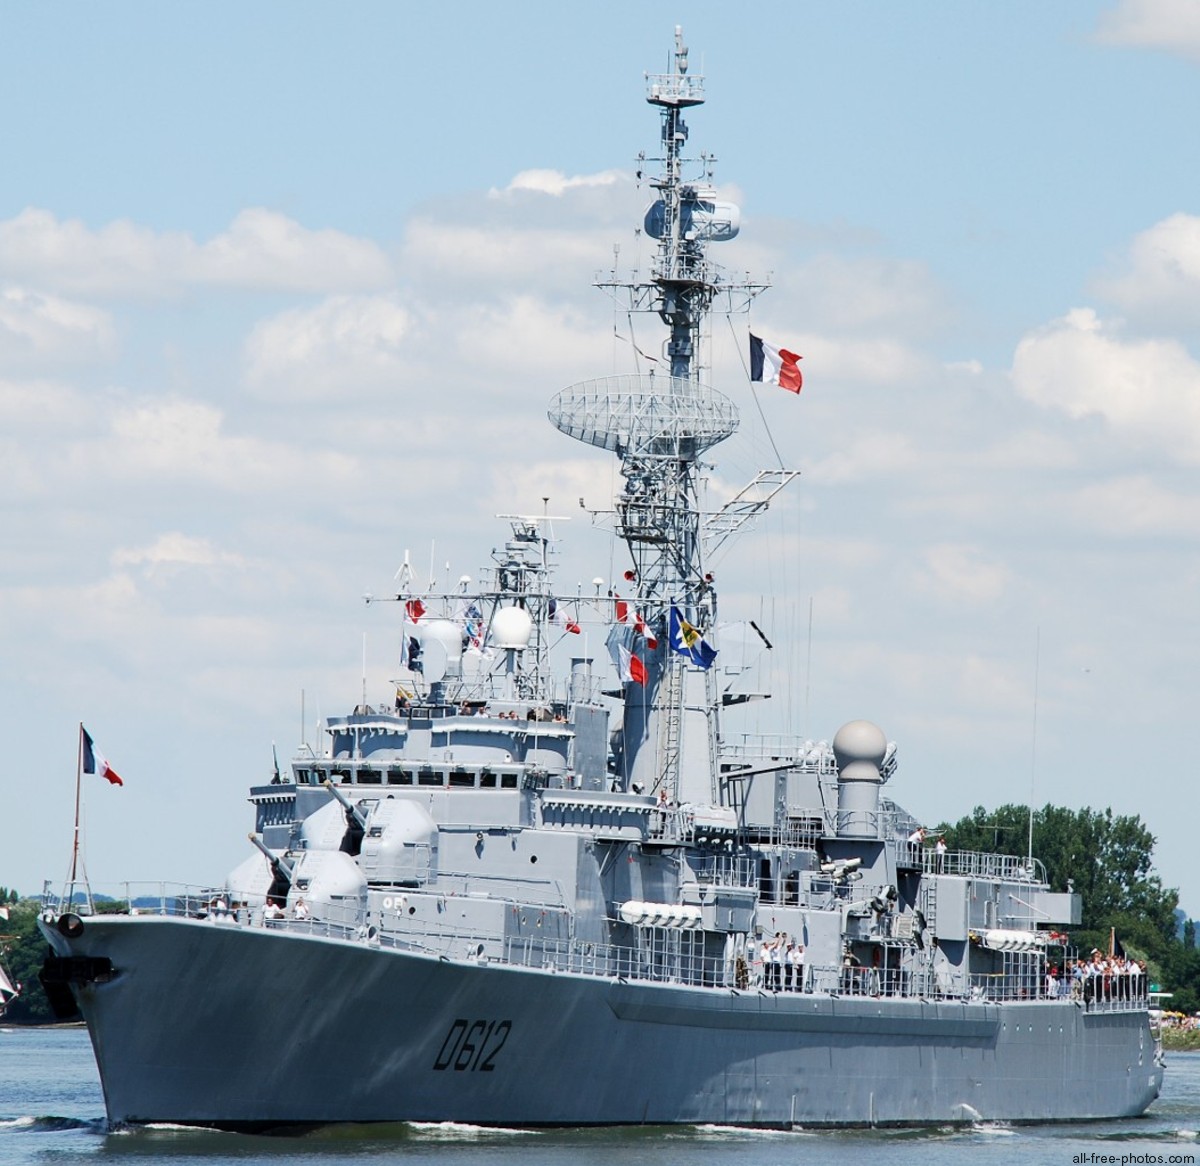 d-612 fs de grasse tourville class type f67 asw frigate destroyer french navy marine nationale 11